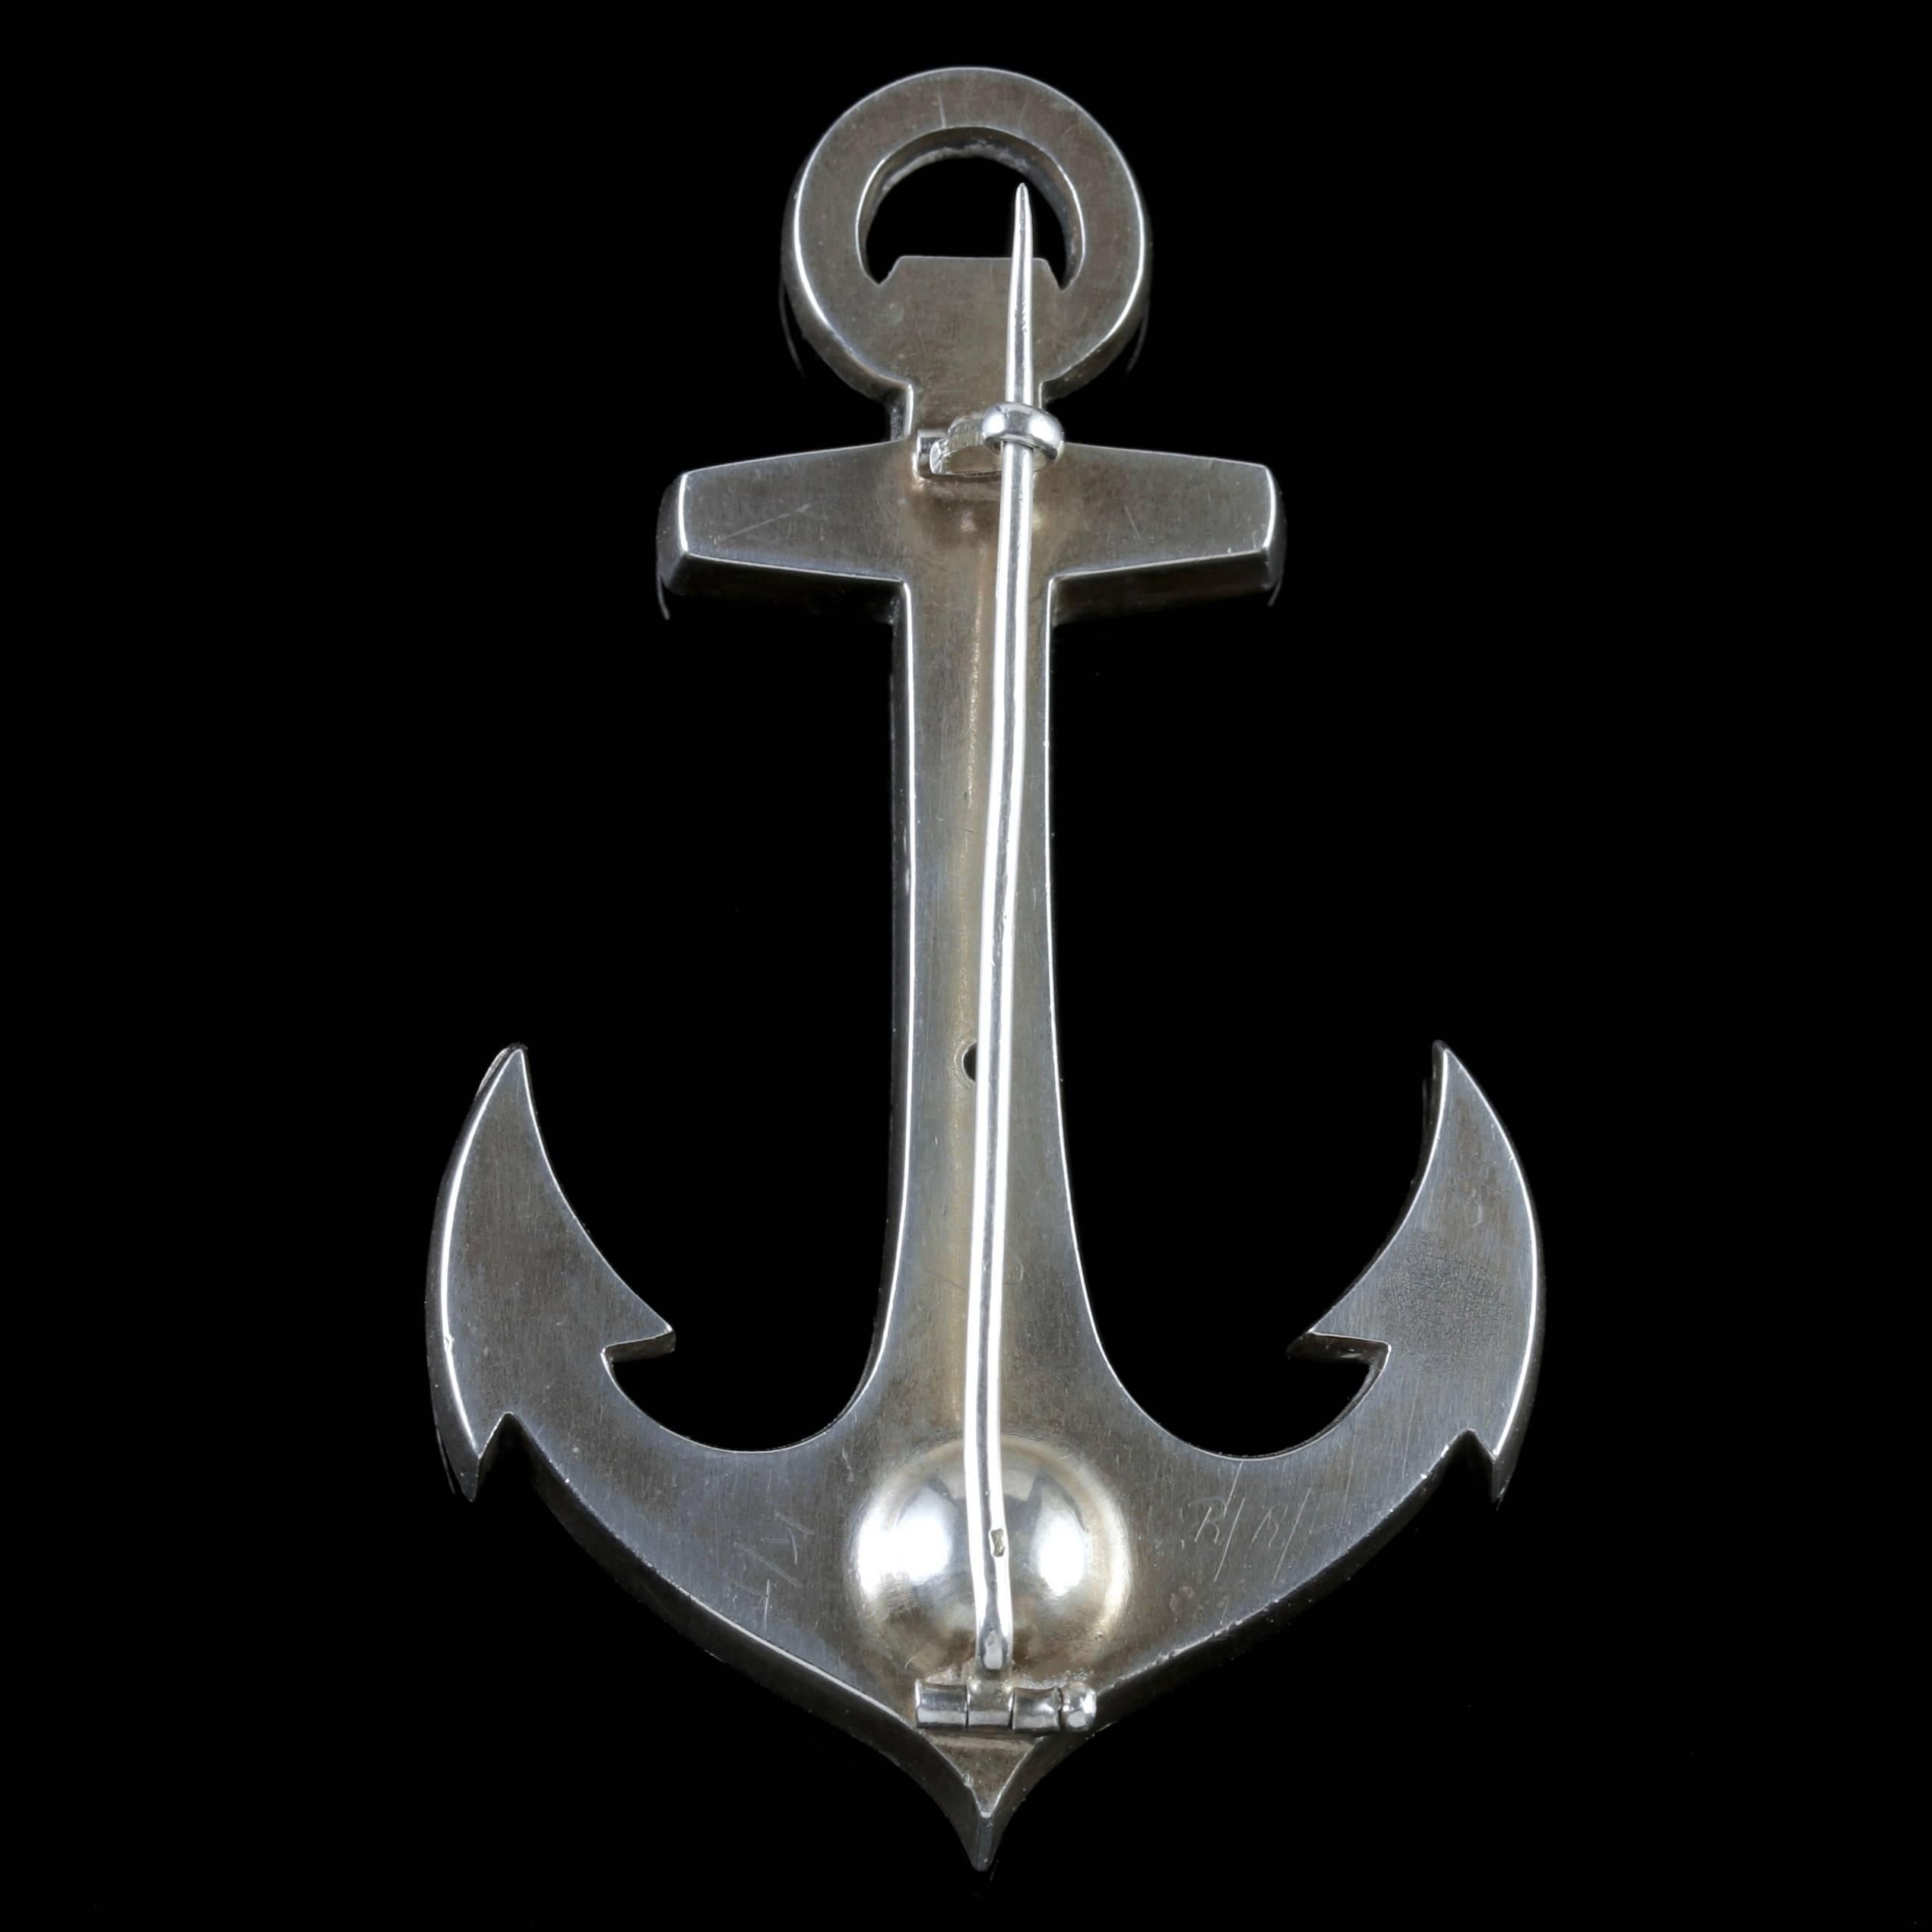 To read more please click continue reading below-

This wonderful Large antique French Sterling Silver Paste Anchor brooch is Circa 1880.

Anchor jewellery pieces symbolise a persons strength and stable qualities. They are also considered an image